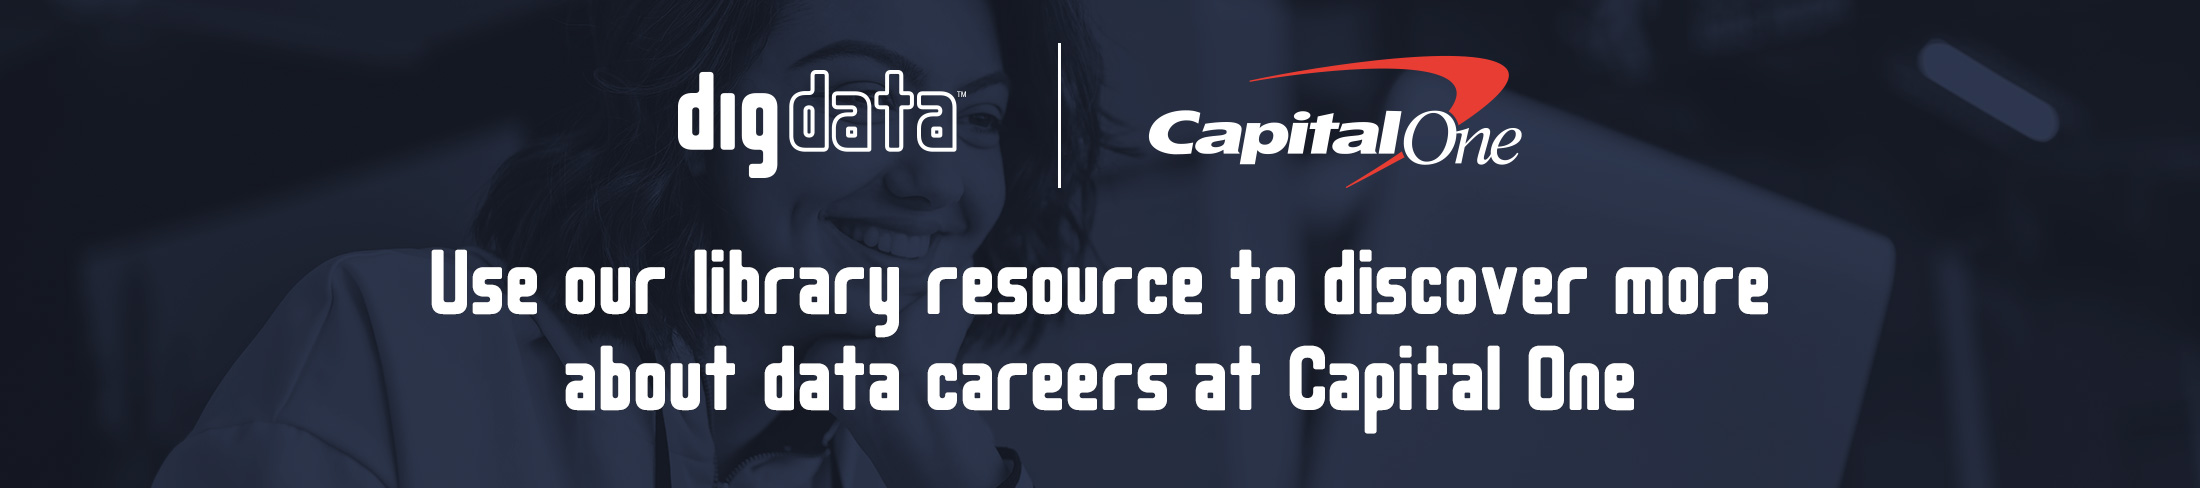 Digdata Capital One Career Panel Resource Banner